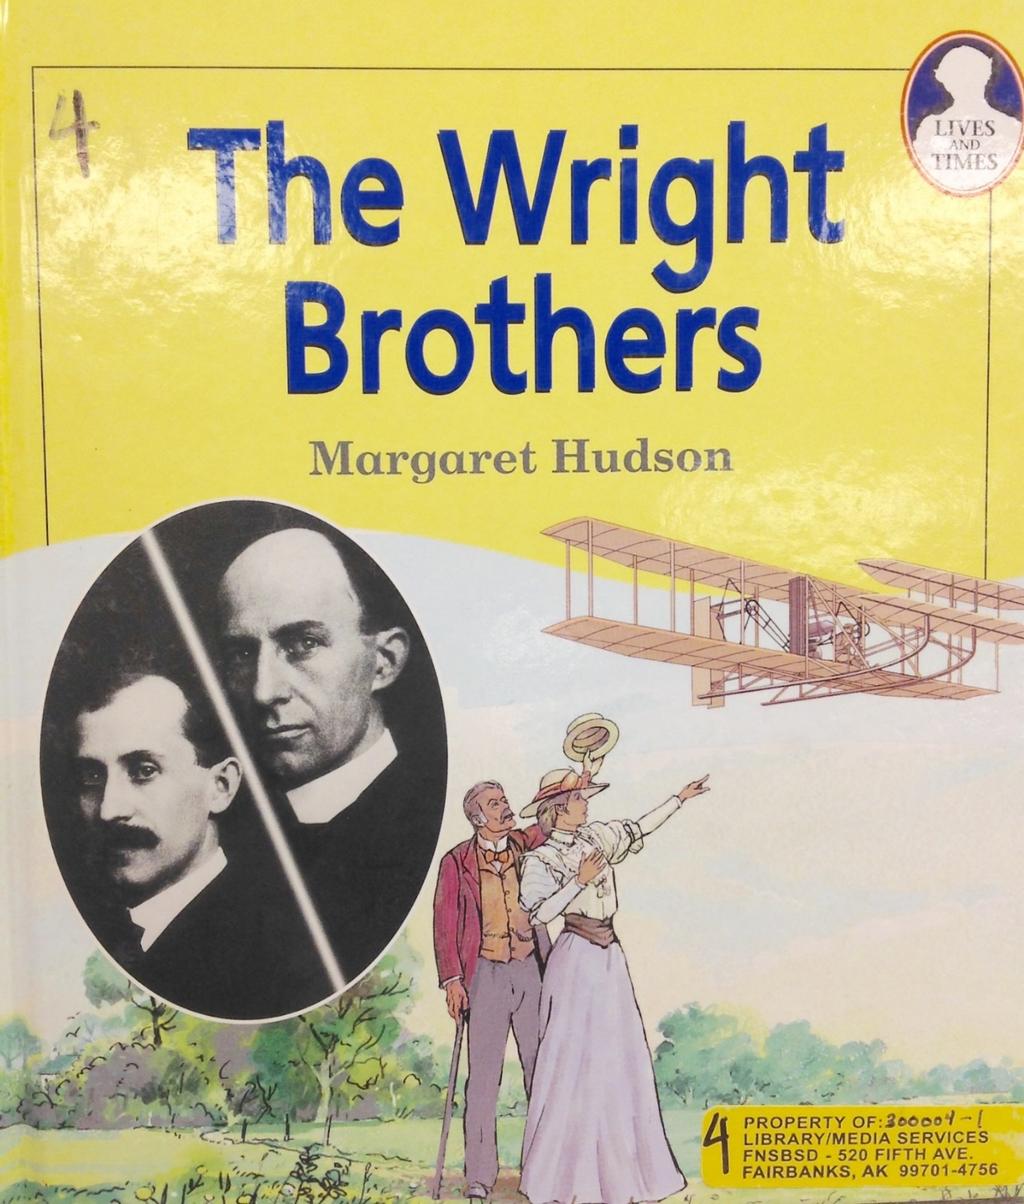 Scientist Biography Kits: The Wright Brothers Audience: First grade and up From bicycle repairmen to airplane engineers This is the amazing story of Orville and Wilbur Wright, whose trials in